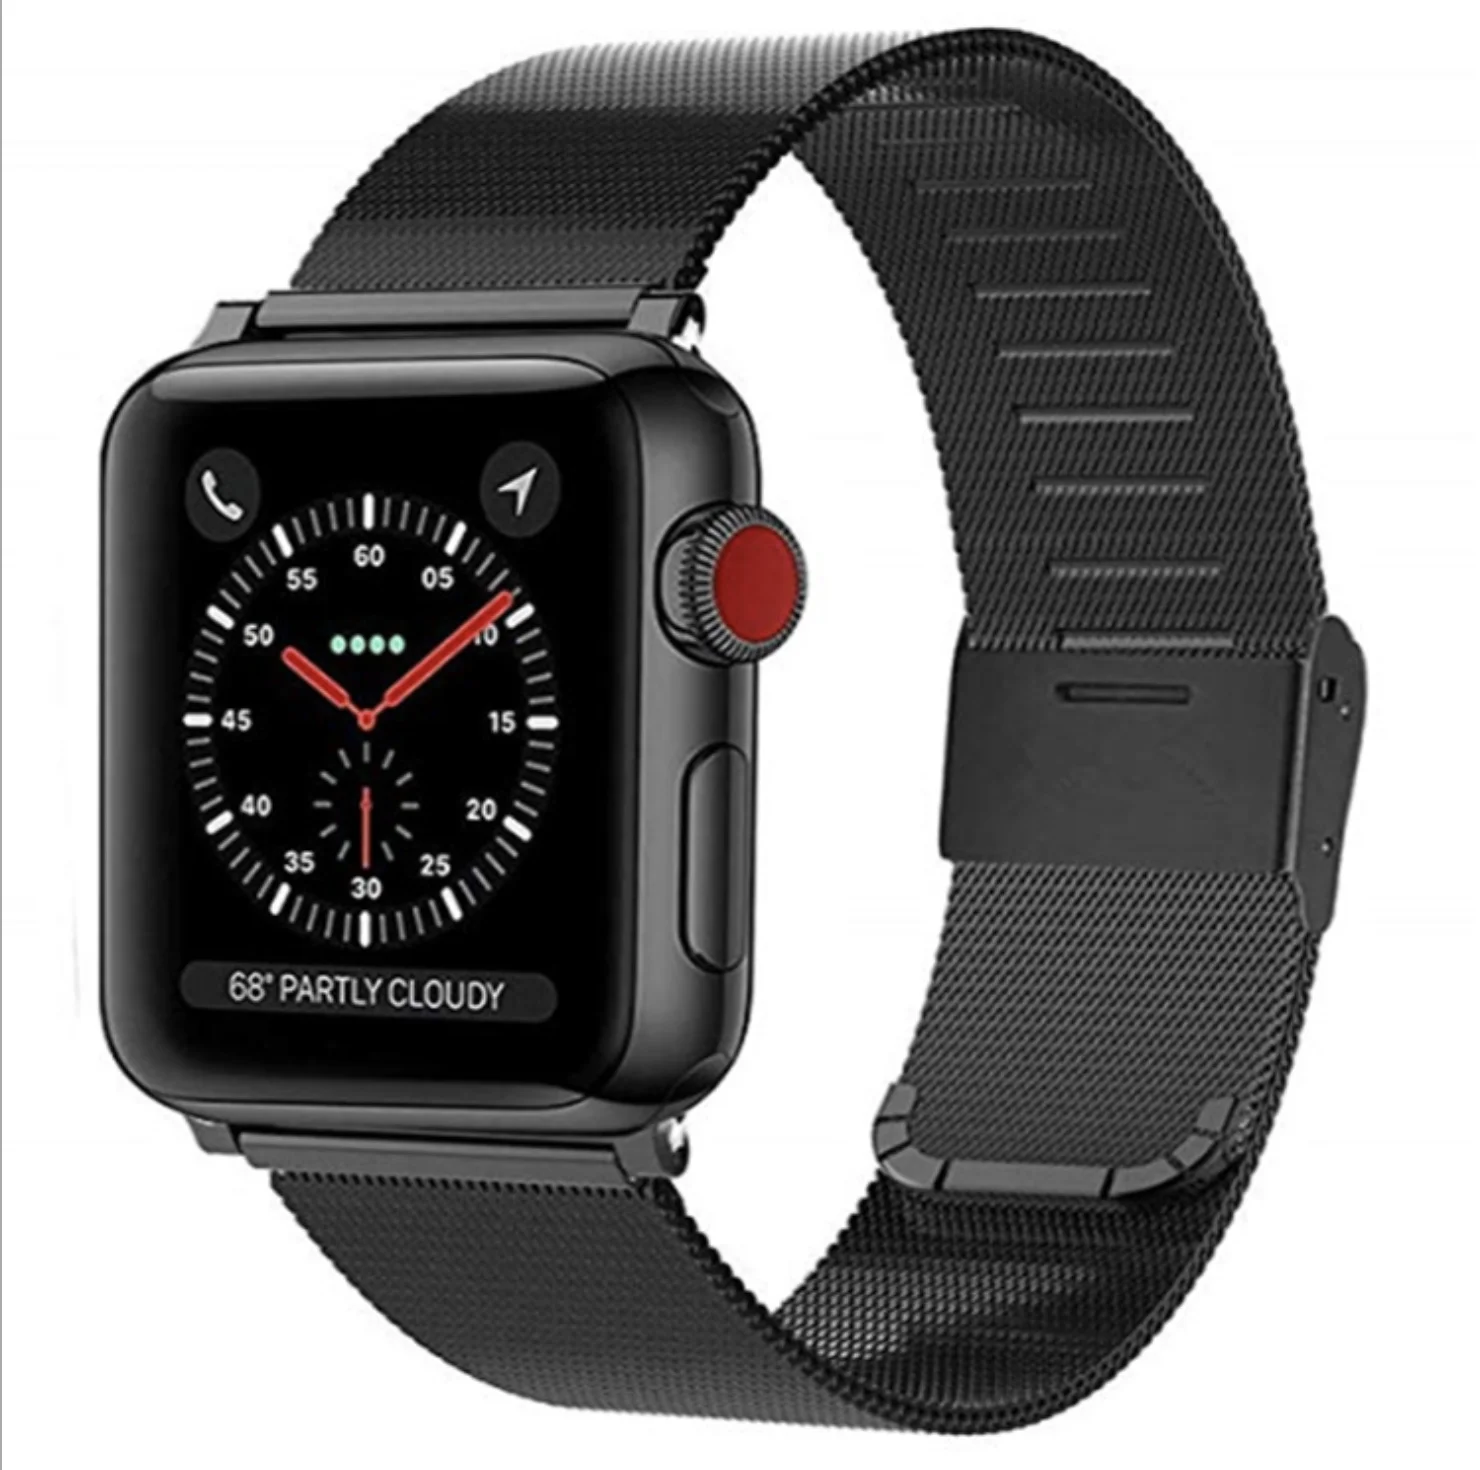 

Milanese 316l clean metal Stainless Steel apple Watch strap Band For i watch Apple Watch Series 1 2 3 4